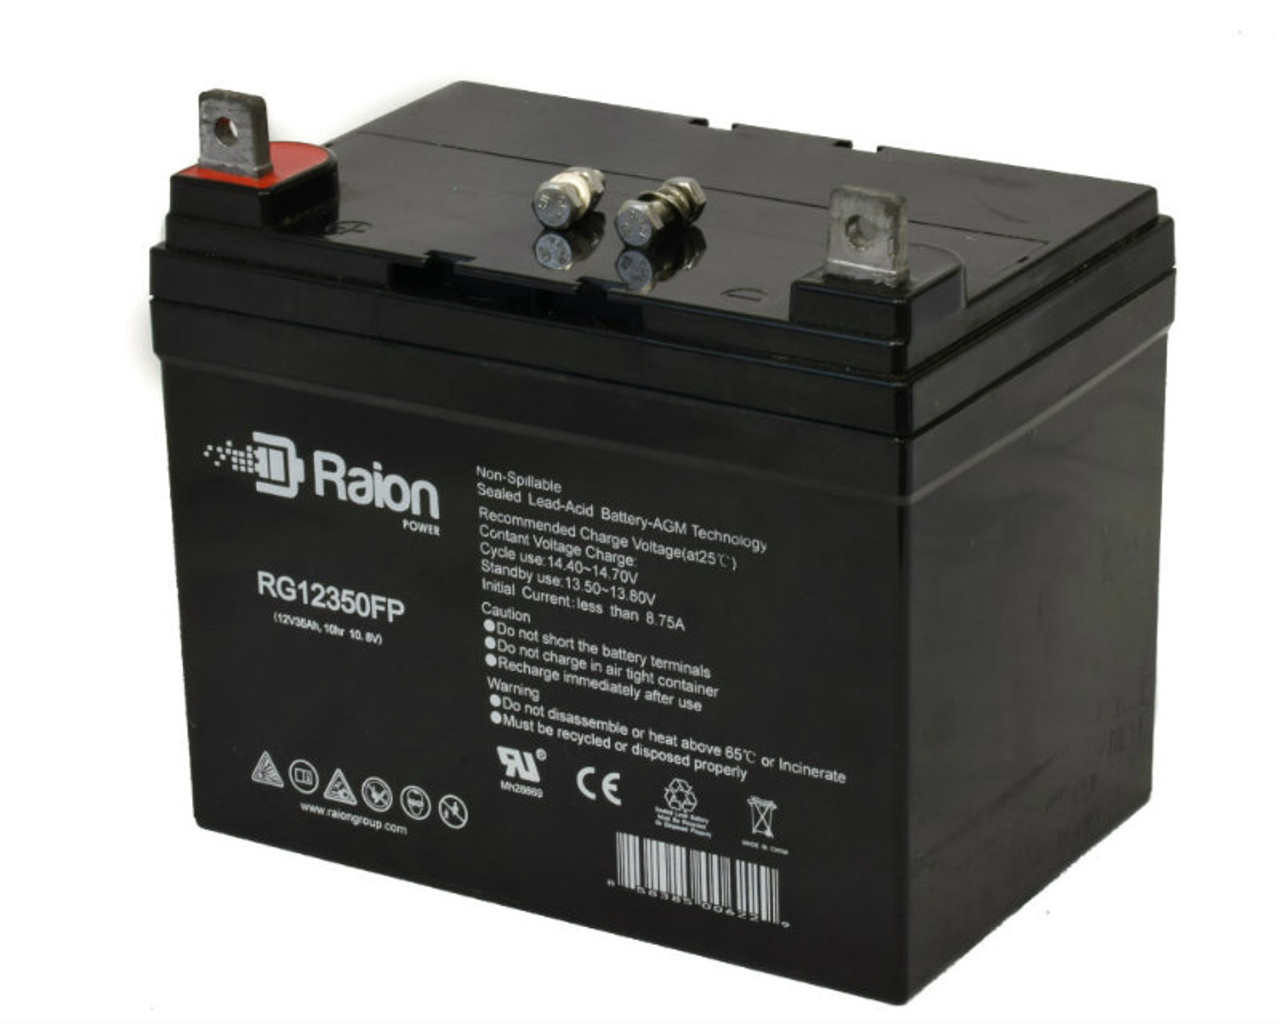 Raion Power Replacement 12V 35Ah RG12350FP Battery for Wheel Horse 57300